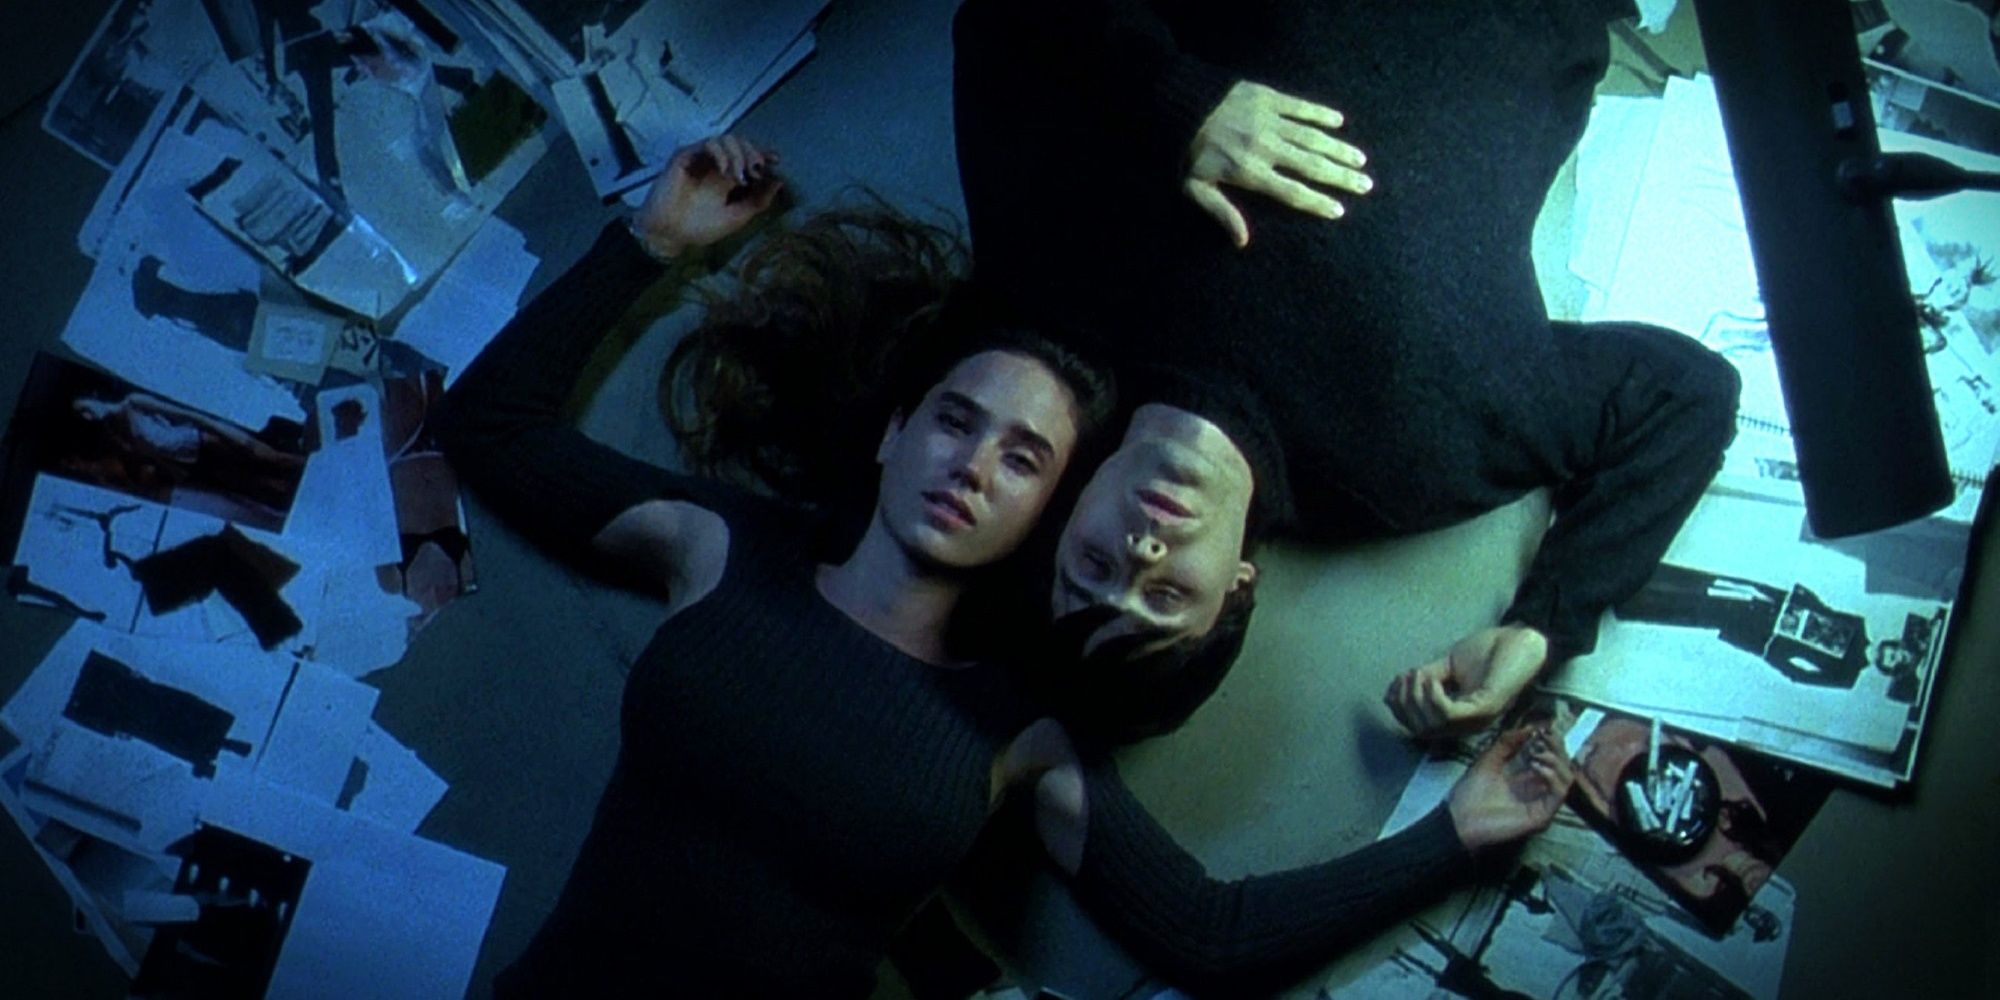 Harry and Marion lying on the floor at Requiem for a Dream.